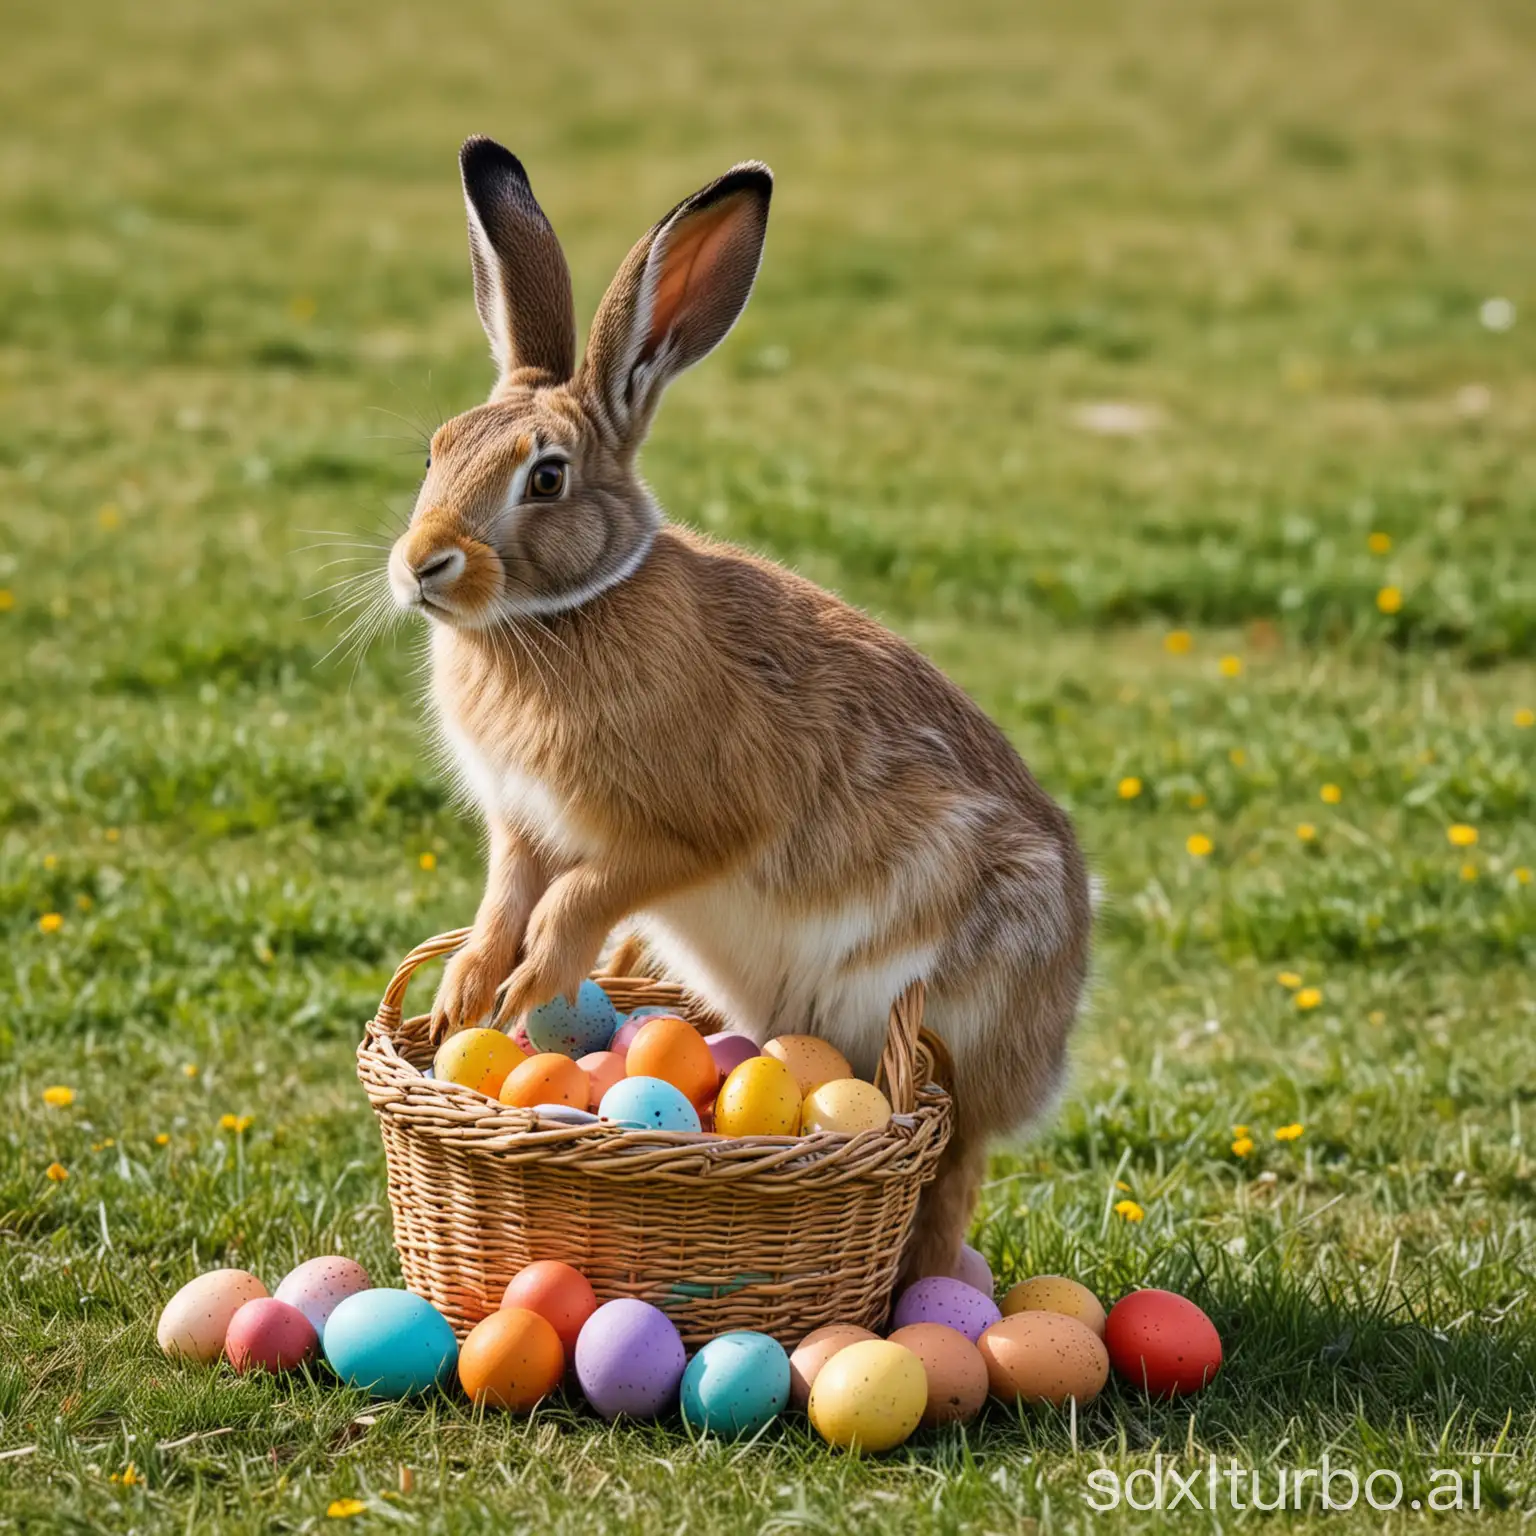 Hare with basket on its back, in the basket are colorful eggs